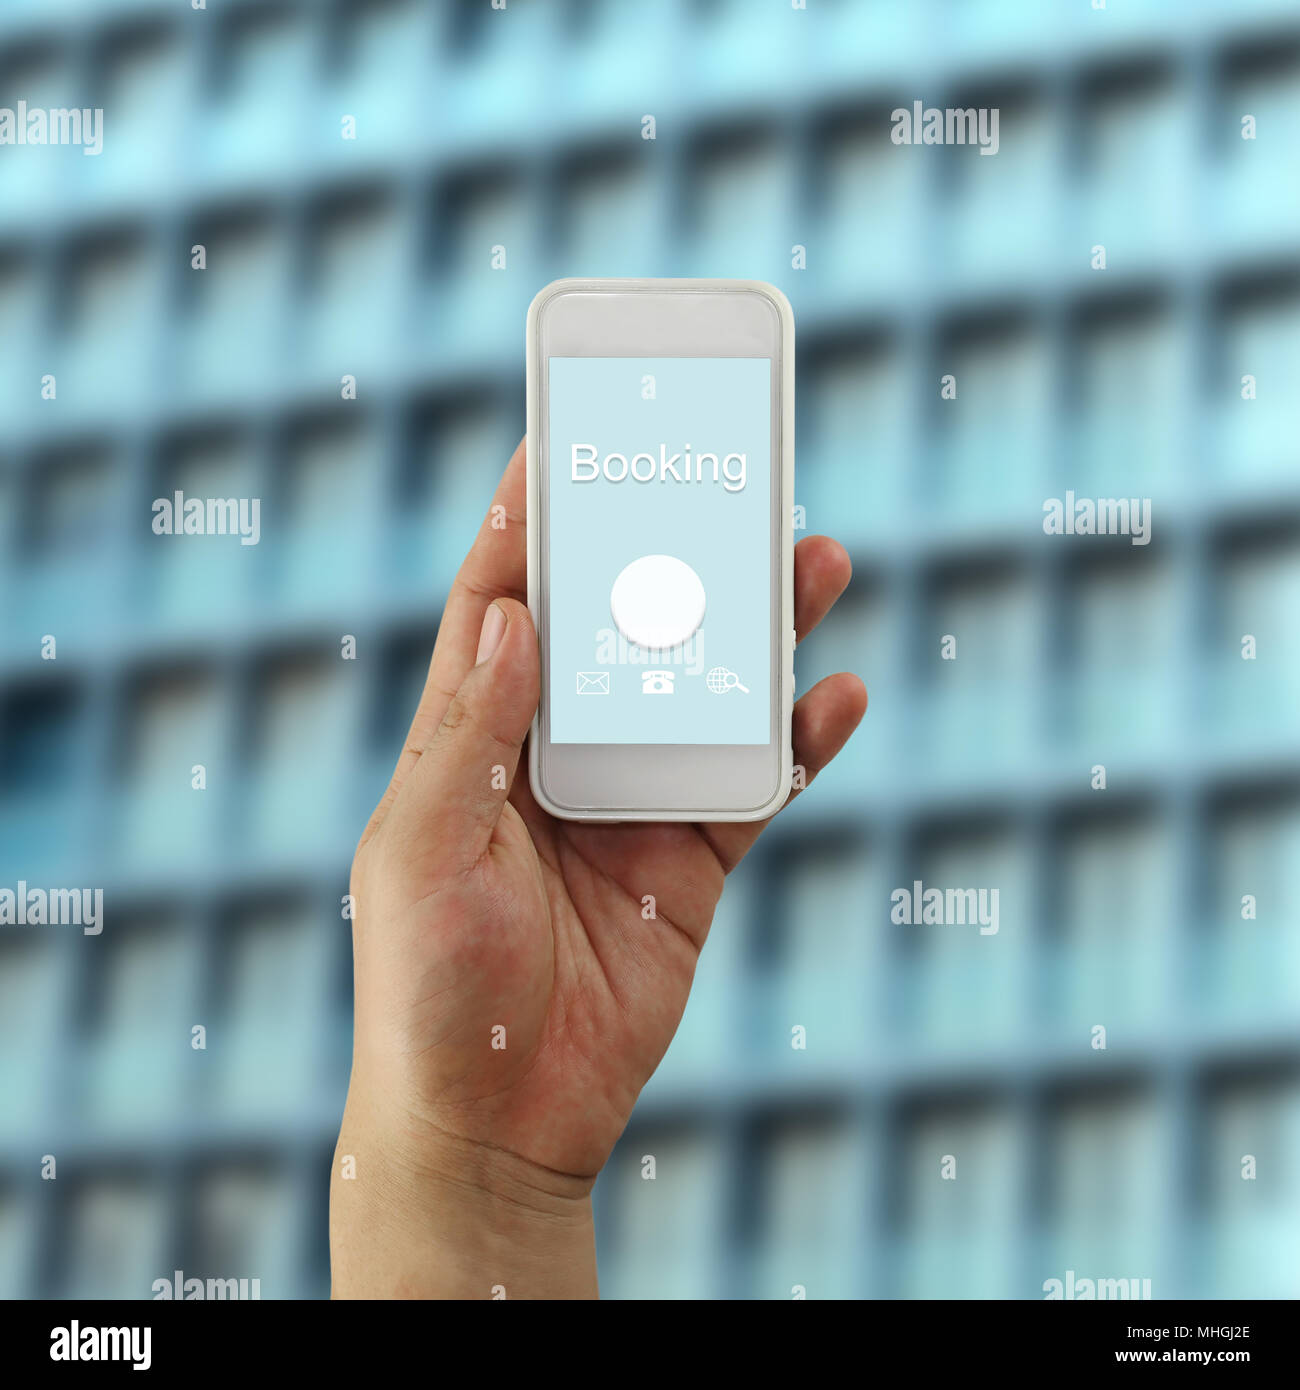 Hand of a businessman holding a smartphone and booking text concept in blur Skyscraper or high building background. Stock Photo